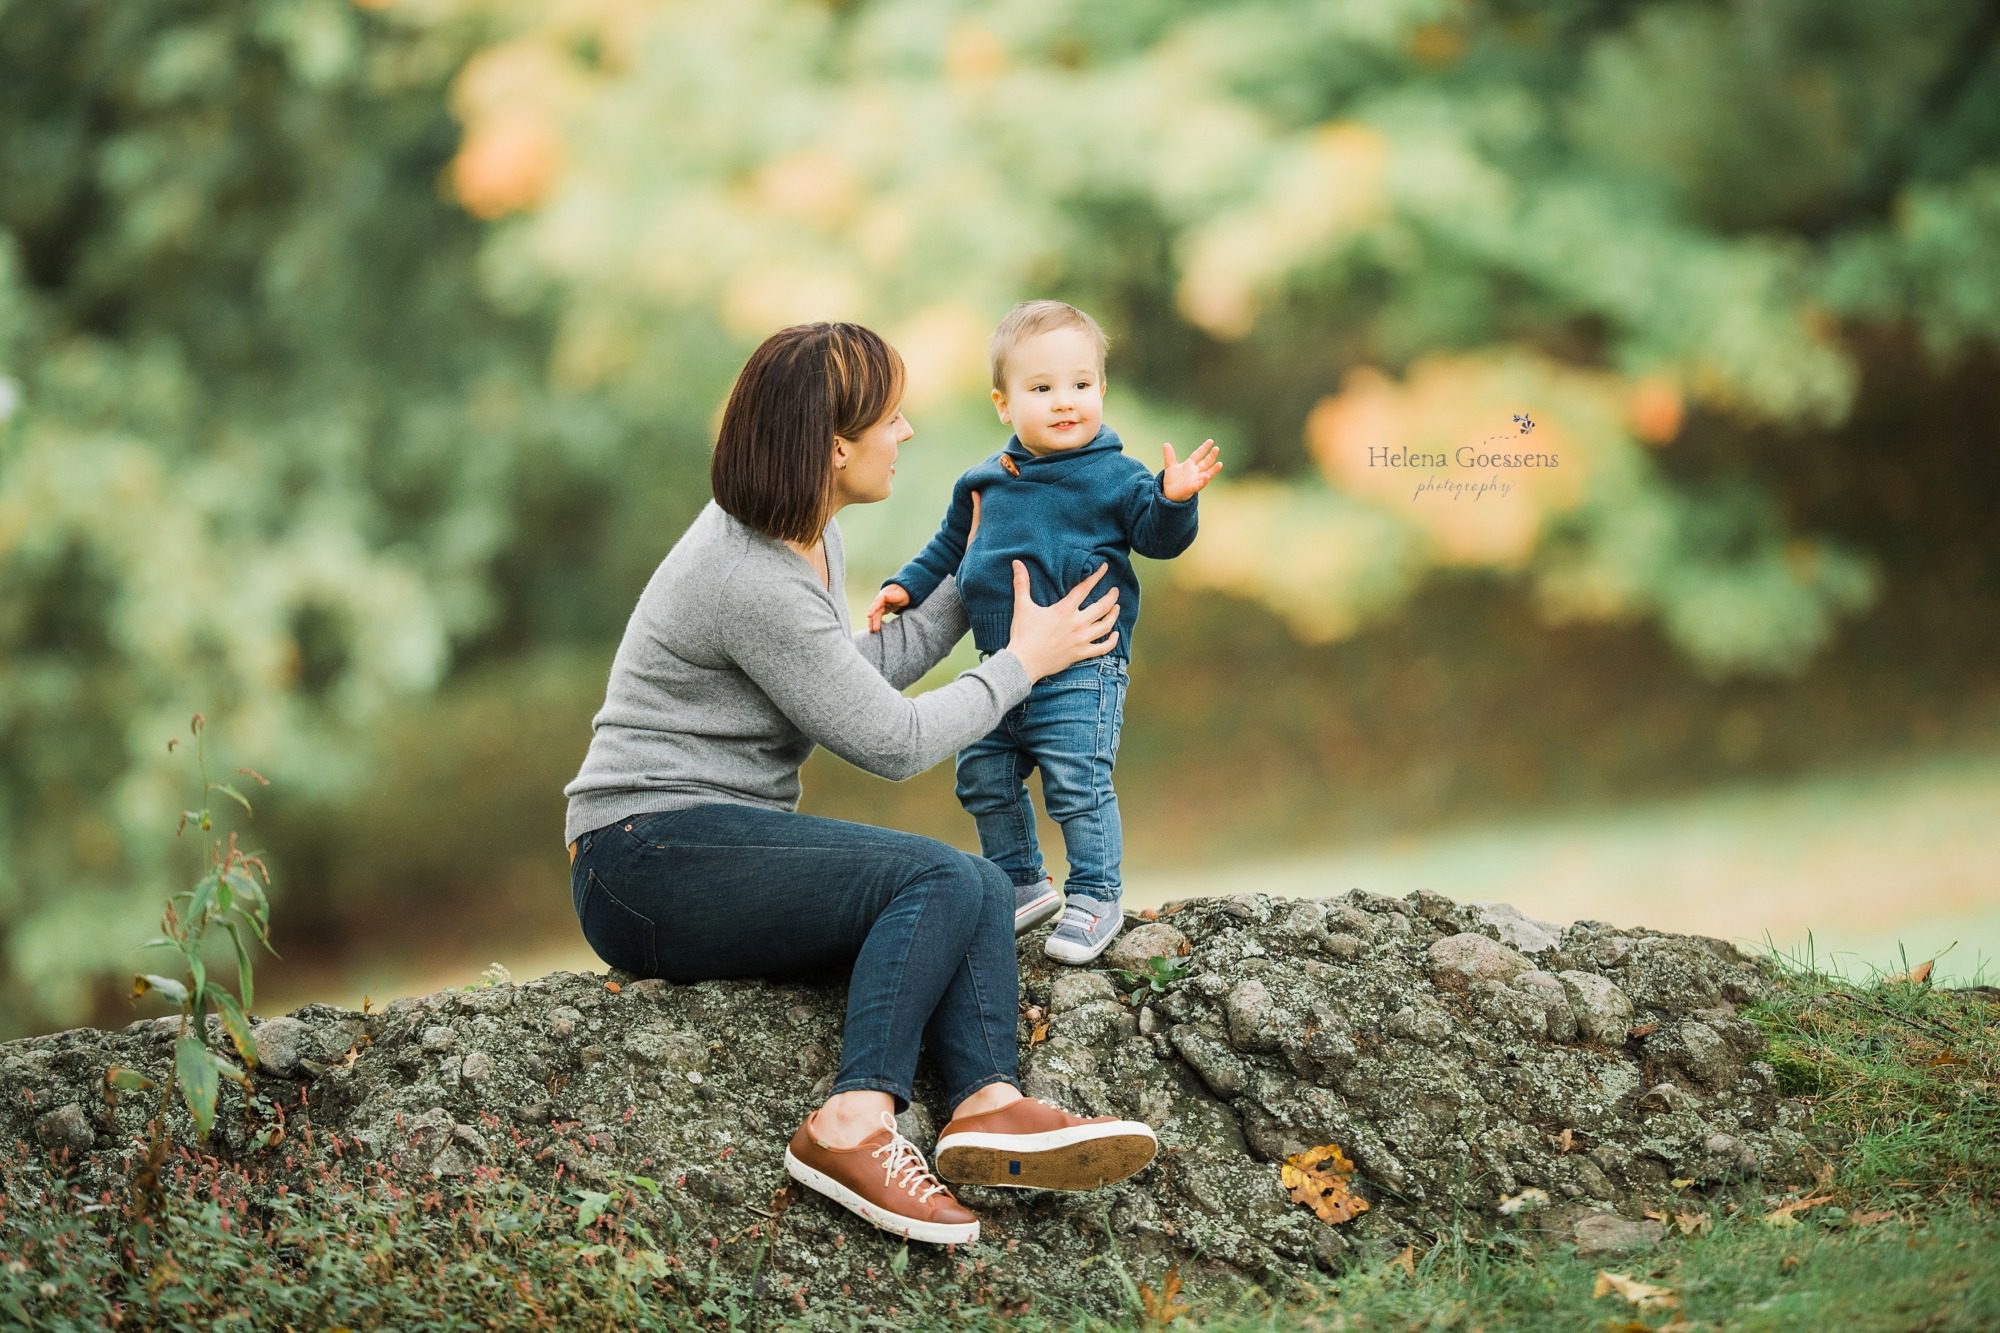 mother and son play in park during family pictures with Helena Goessens